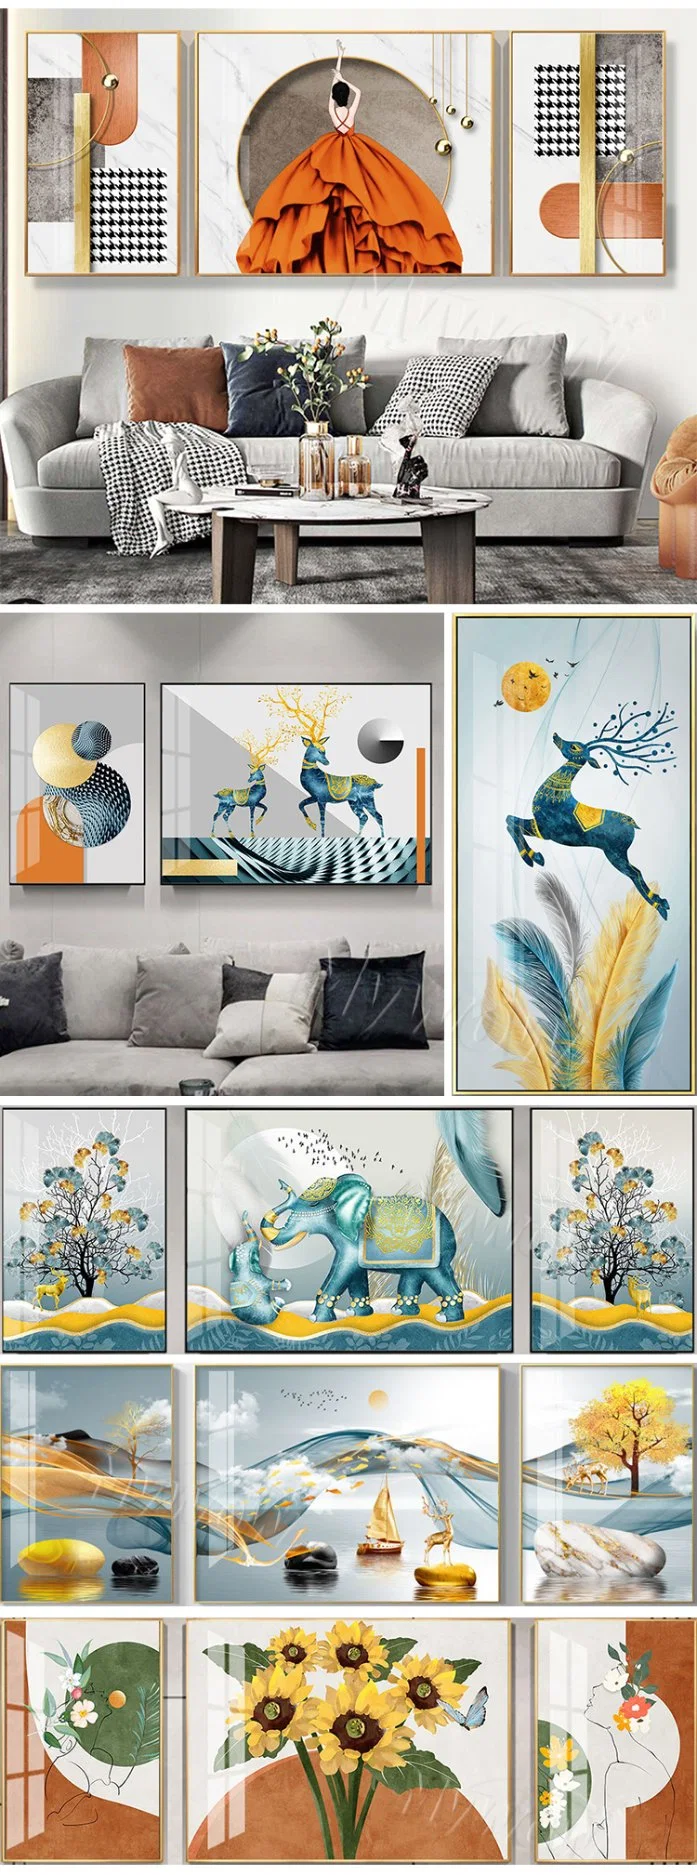 New Modern Fashion Design Art Work Painting for Living Room Decoration